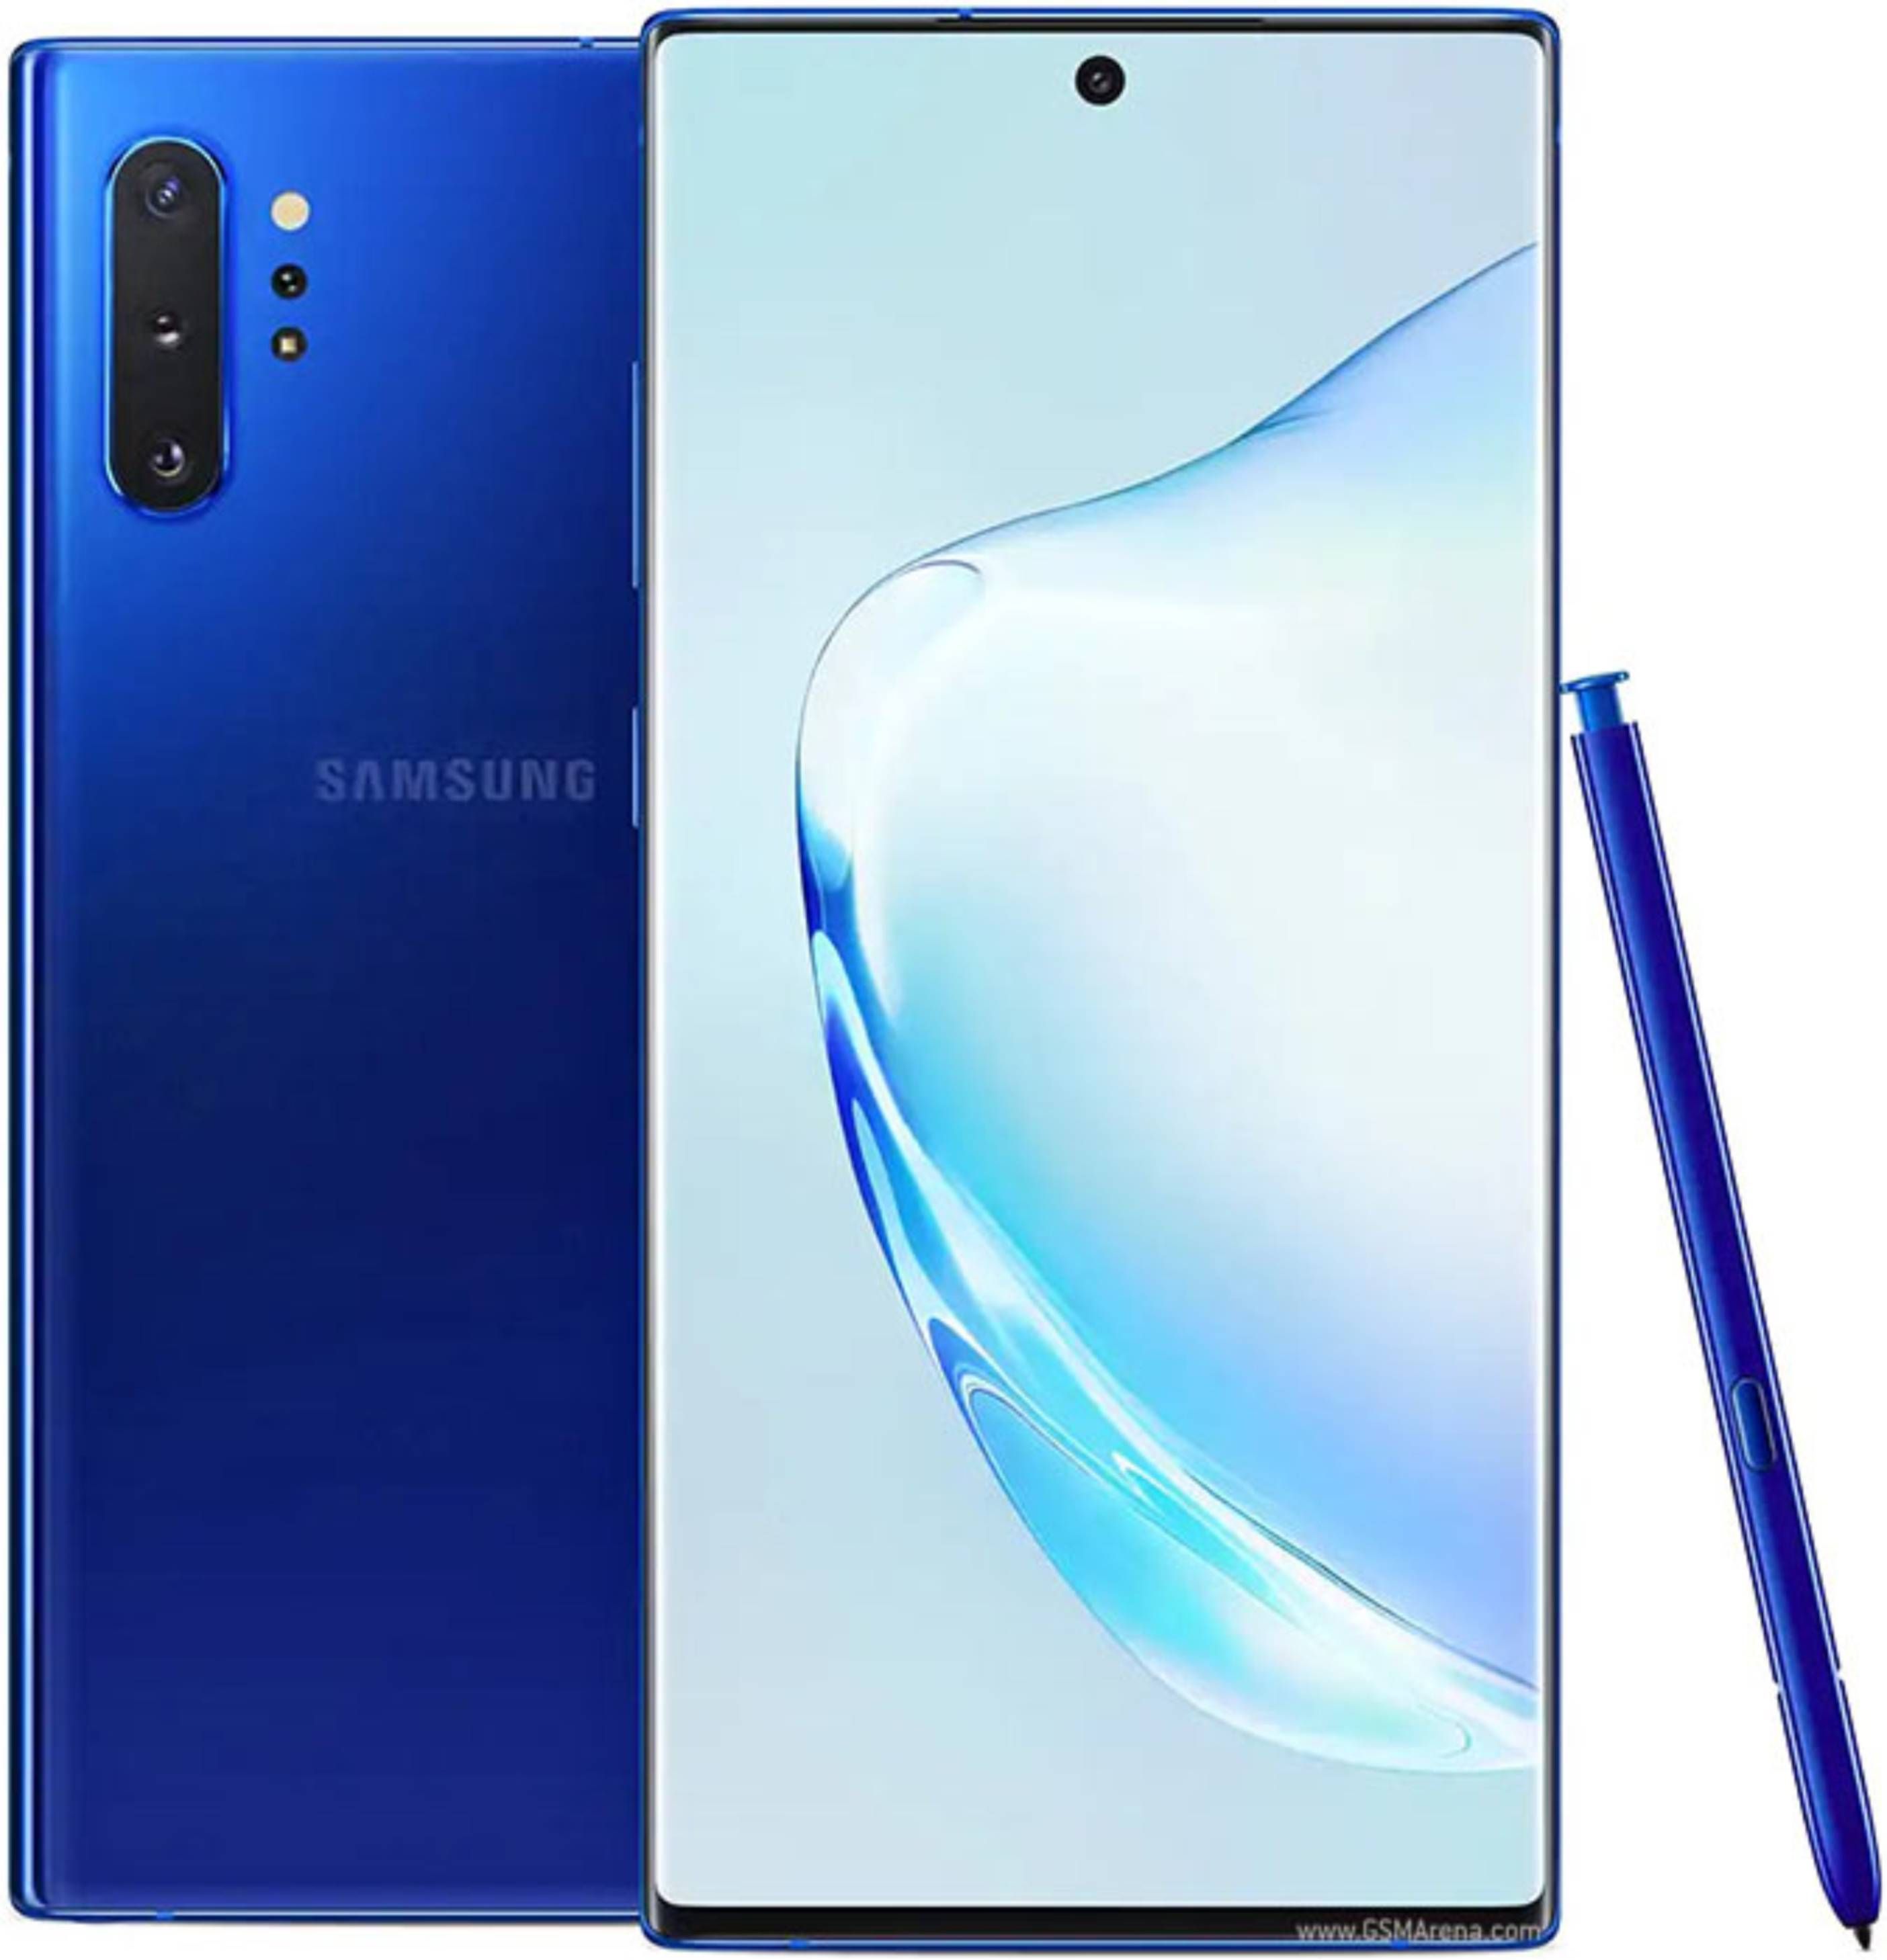 What is Samsung Galaxy S10 Plus Screen Replacement Cost in Nairobi?